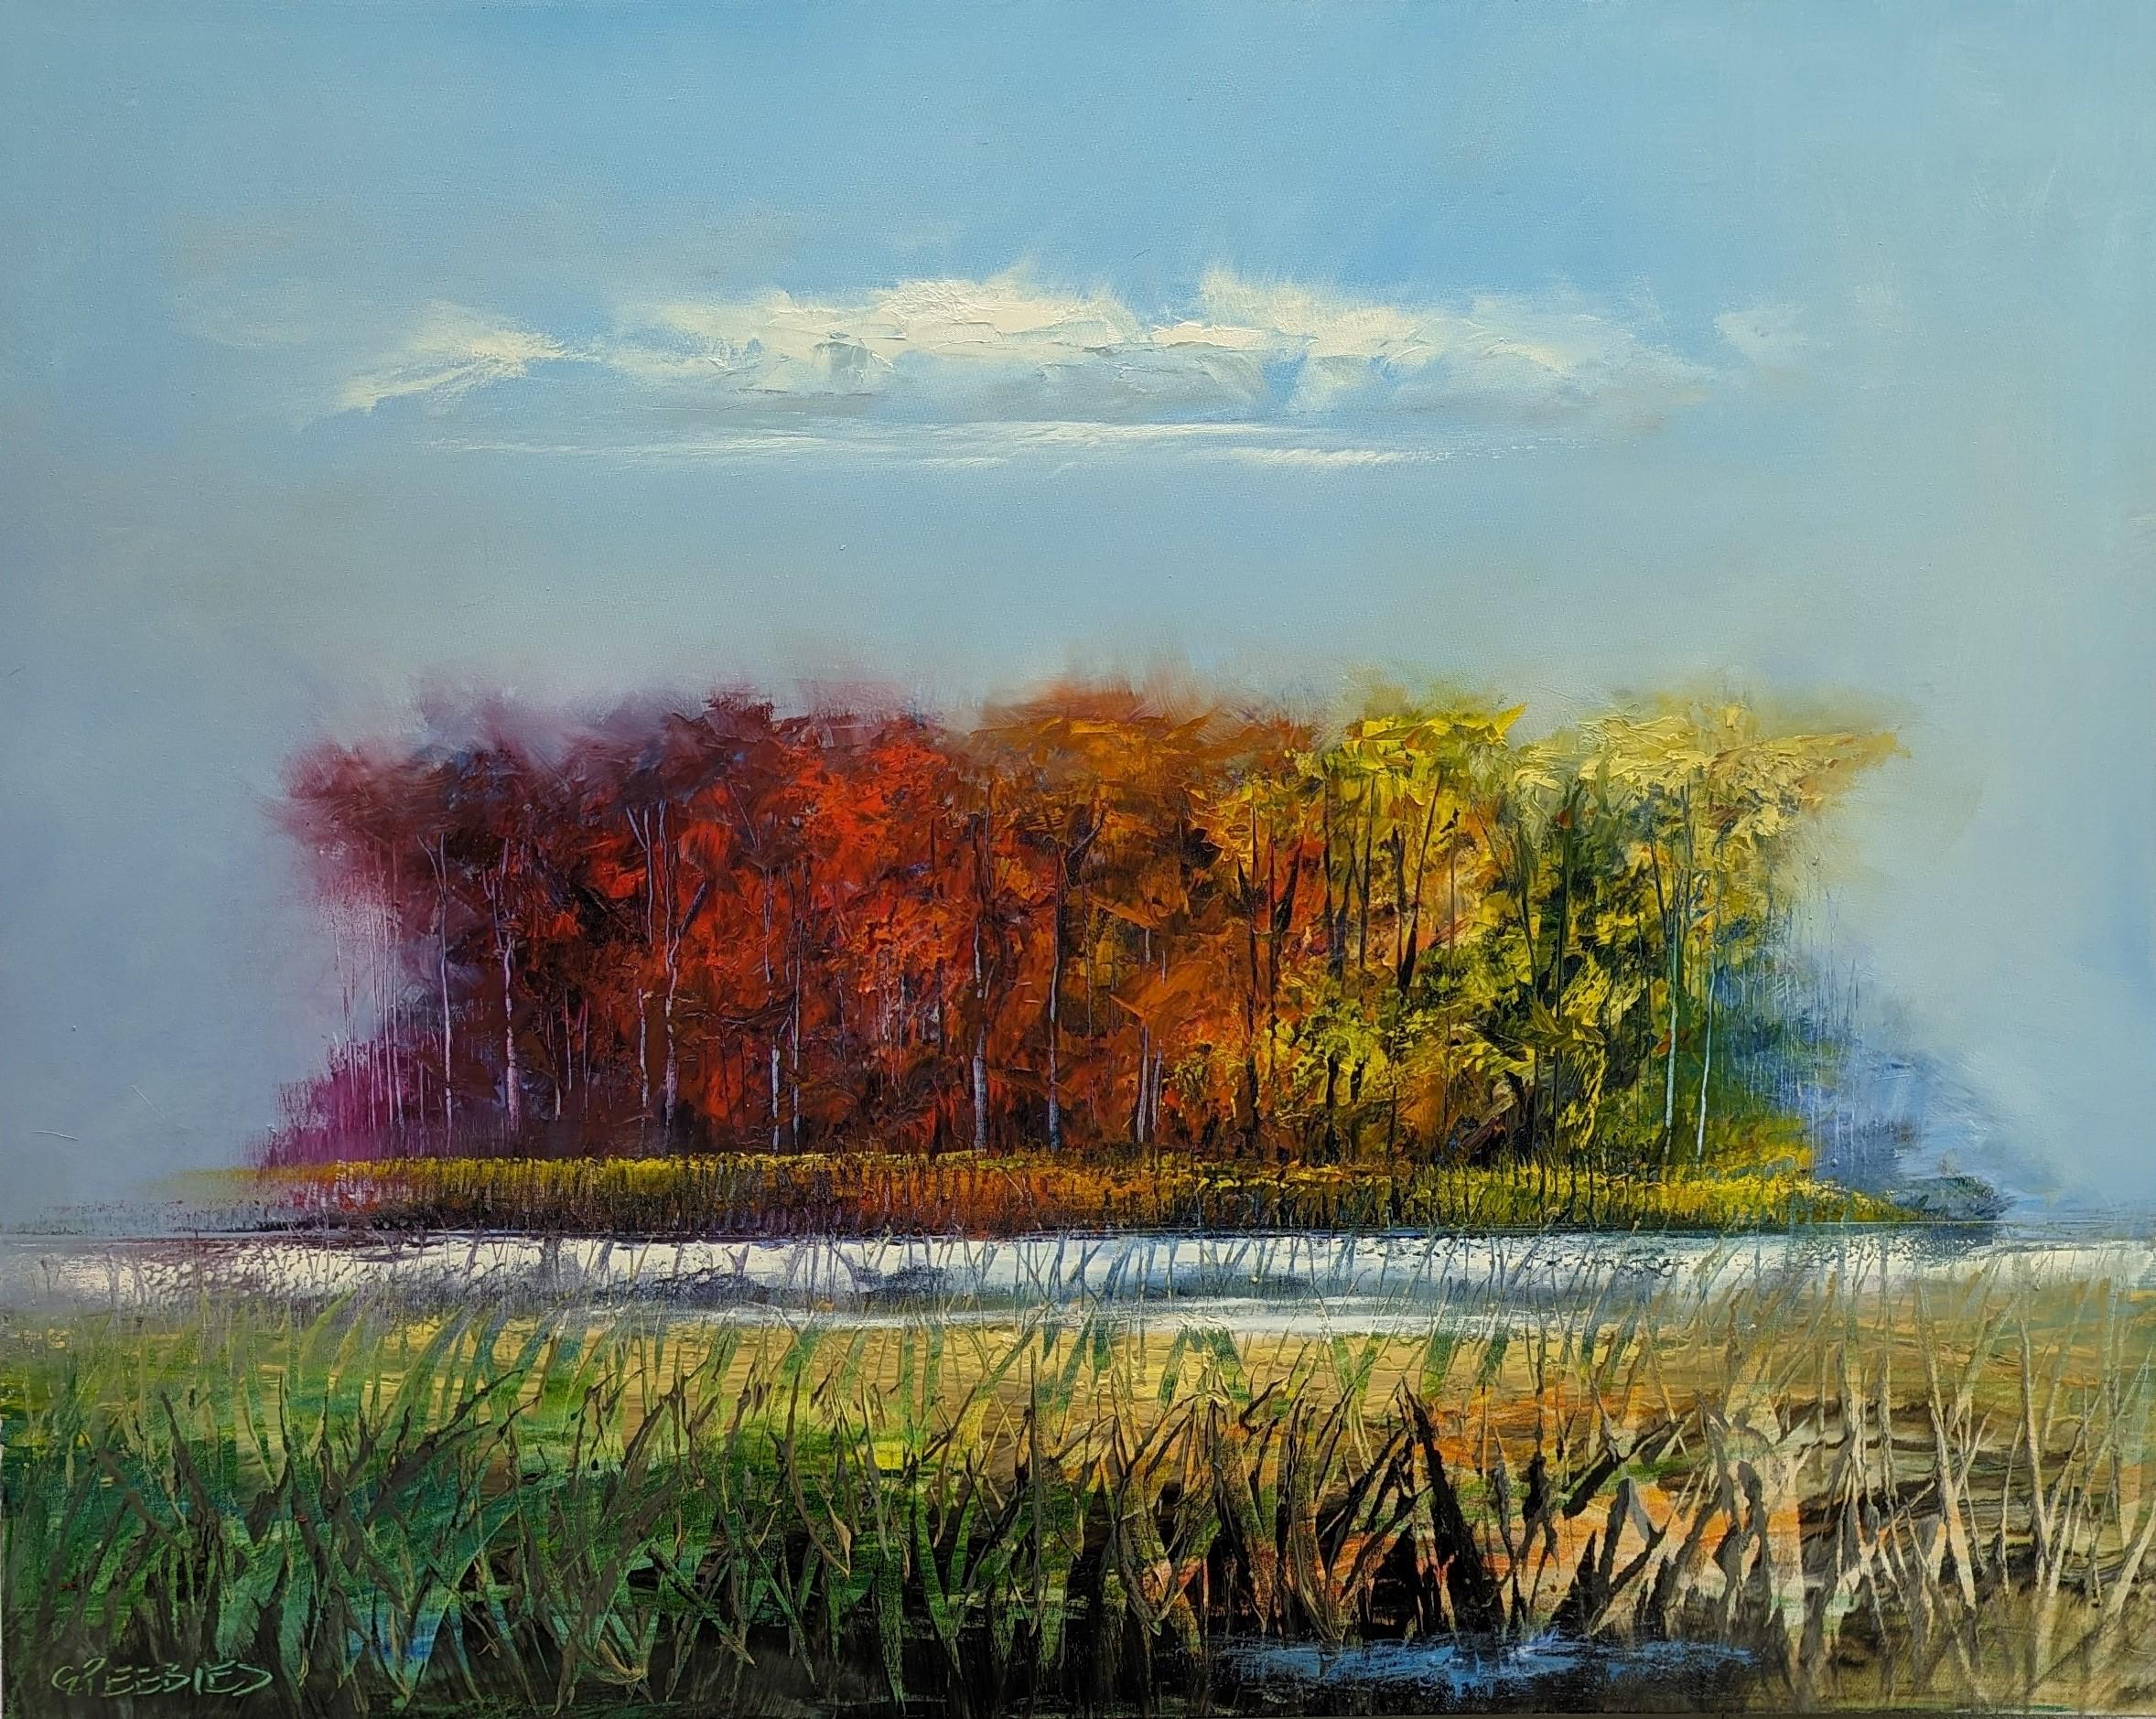 Autumn is Alive, Oil Painting - Art by George Peebles